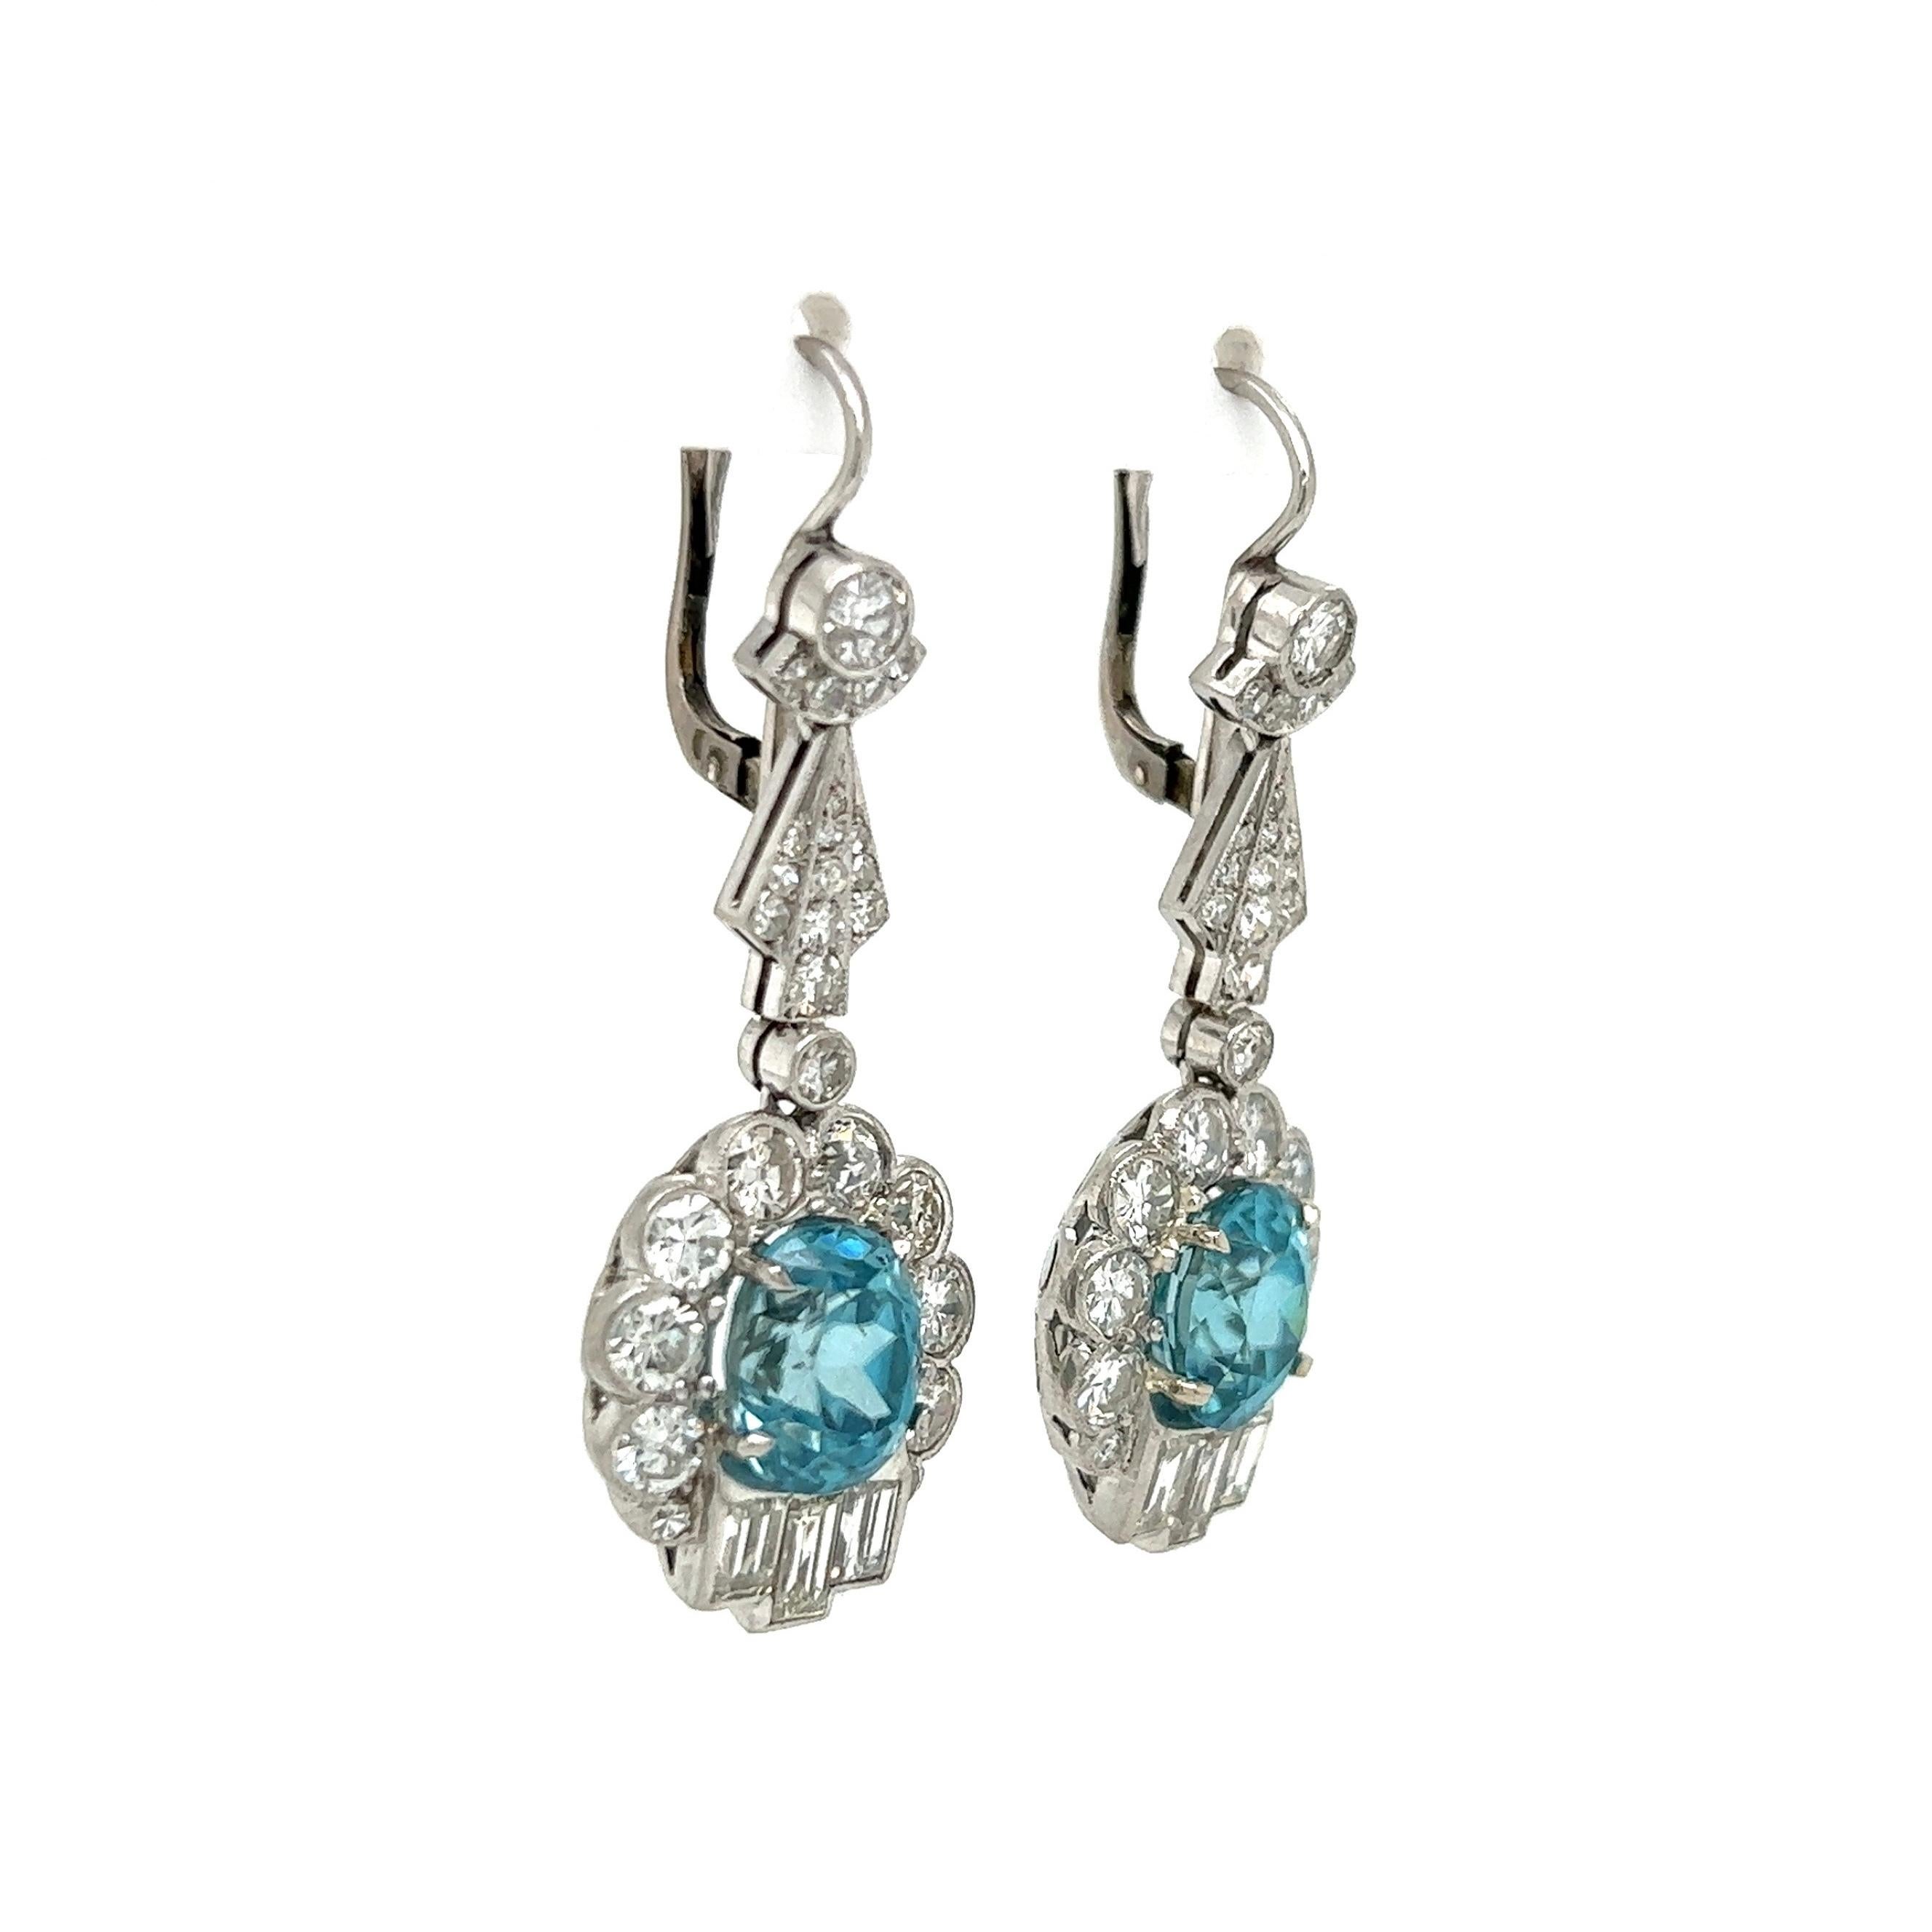 Simply Beautiful! Finely detailed Art Deco Blue Zircon and Diamond Platinum Drop Earrings. Each earring Hand set with a Blue Zircon Gemstone. Approx. 8.40tcw for both. Artfully surrounded by Old European cut Diamonds, approx. 4.10tcw. Post and